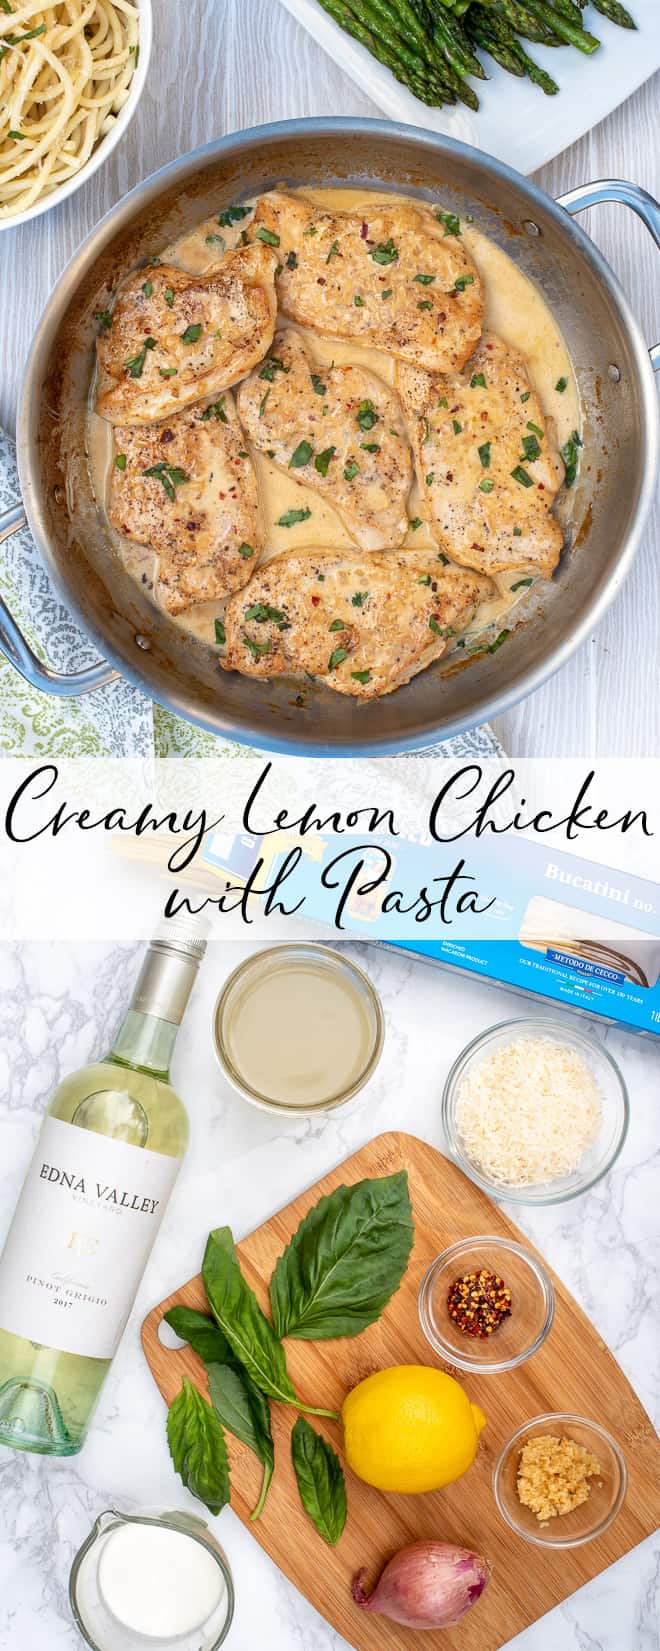 Thin-sliced chicken with a luscious lemon cream sauce served over basil Parmesan pasta. This Creamy Lemon Chicken with Pasta is an elegant but easy meal!